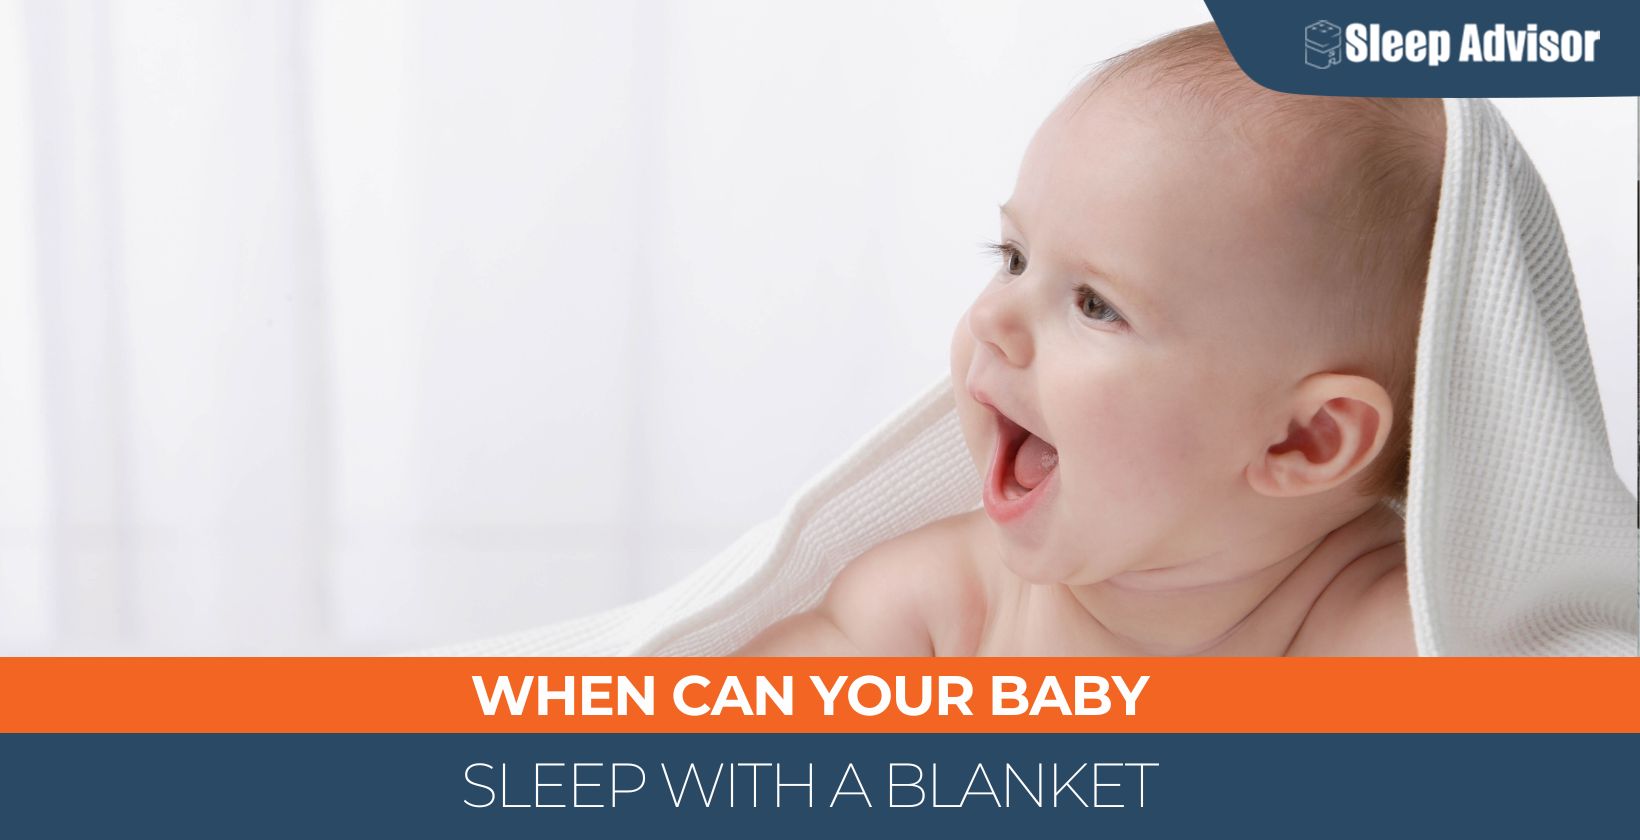 When Can Your Baby Sleep With a Blanket? Our Top Safety Safety Tips